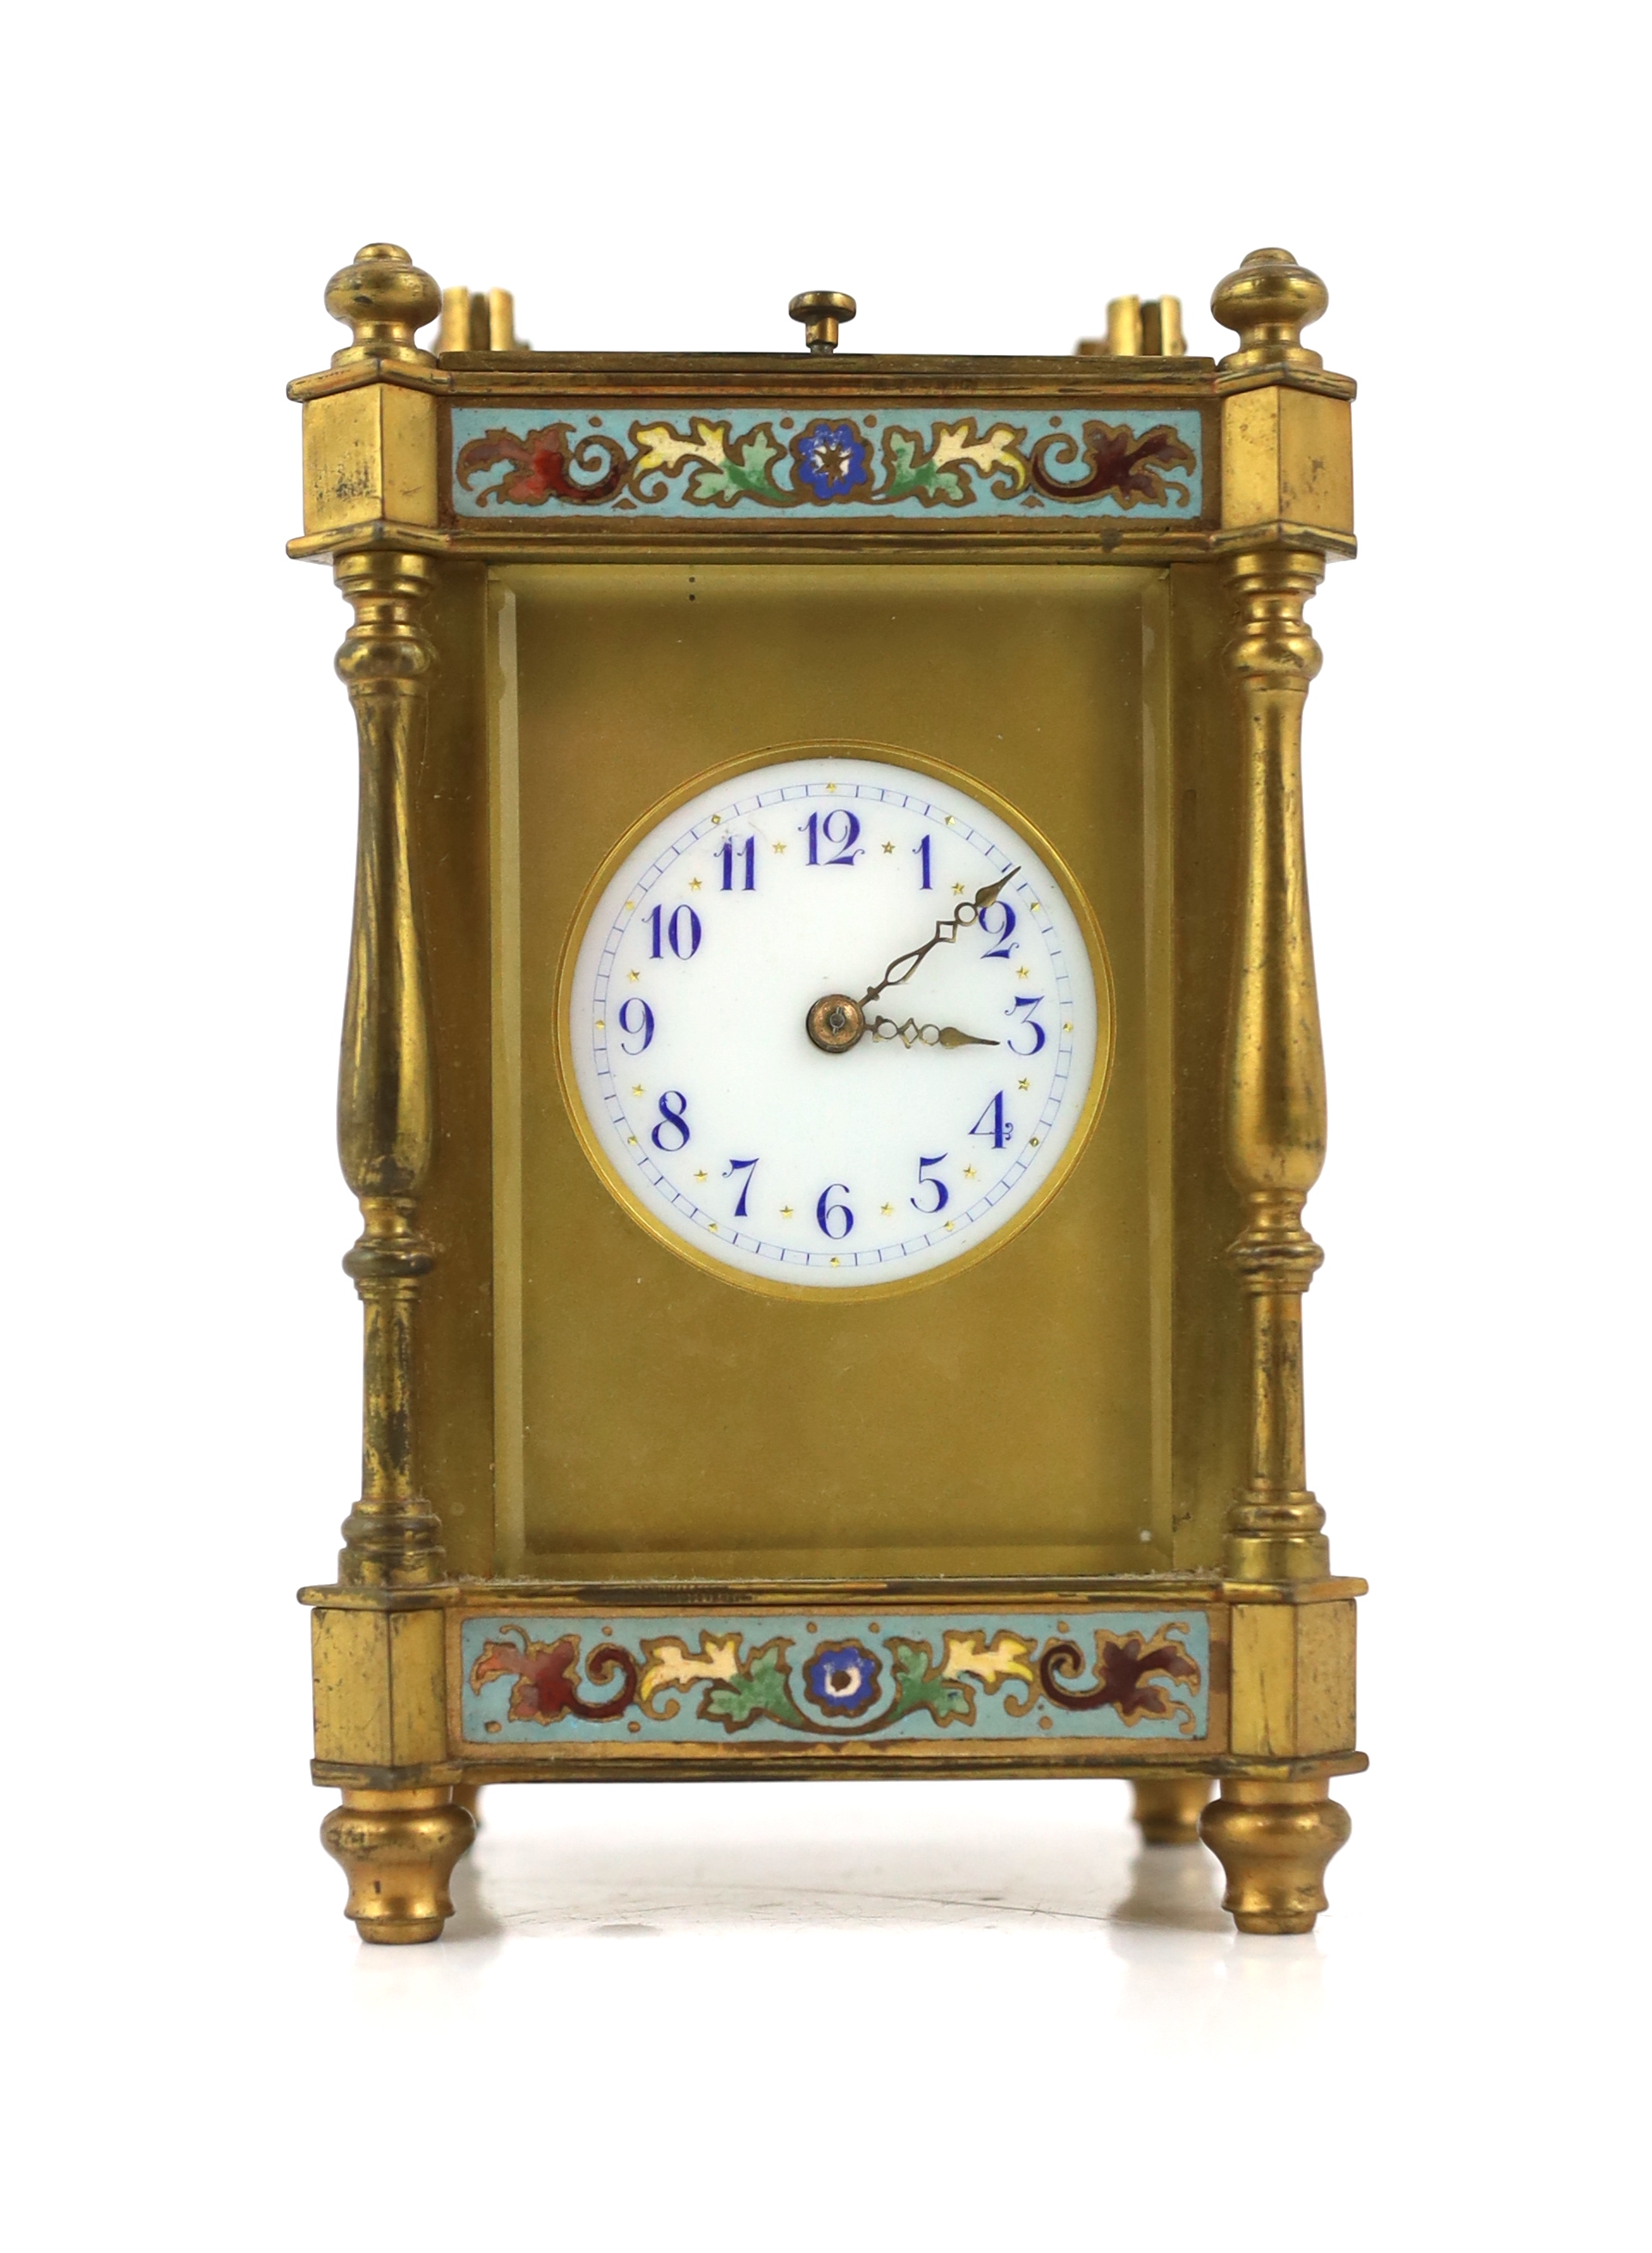 An early 20th century French ormolu and champlevé enamel hour repeating carriage clock